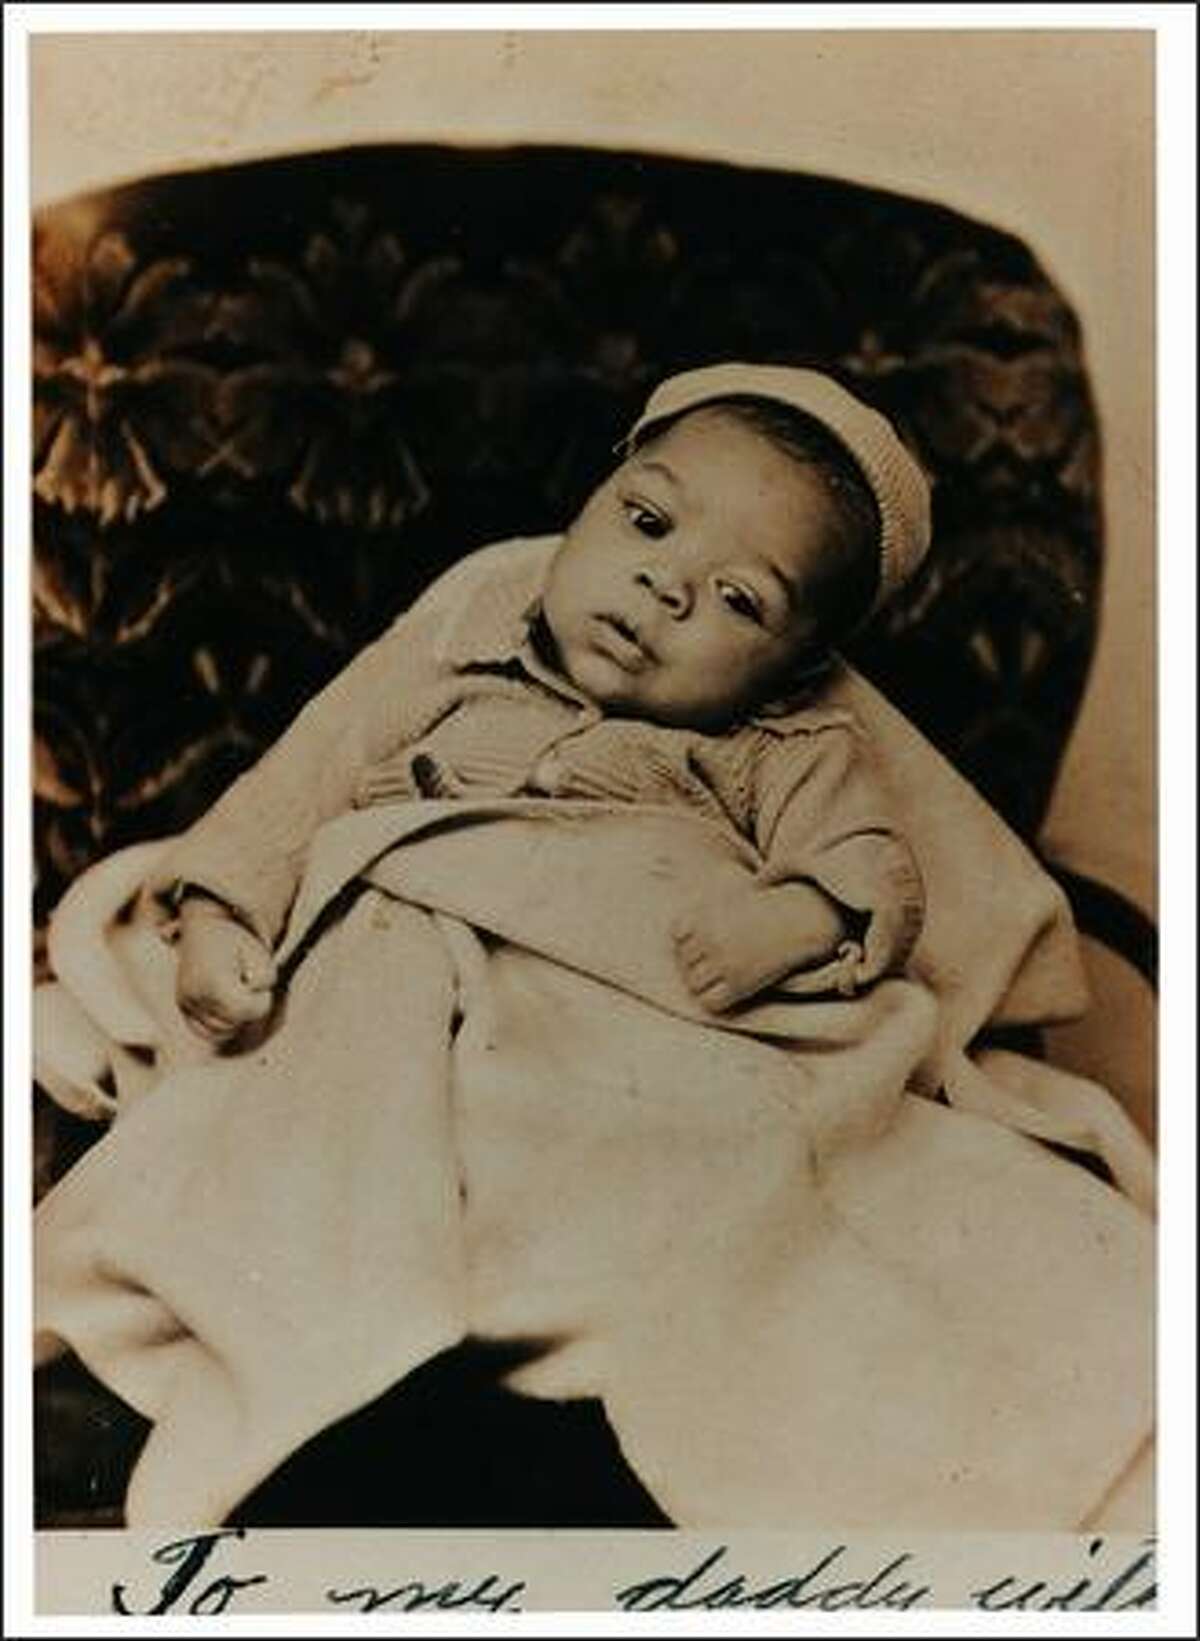 Photograph of Jimi Hendrix as a baby. Part of the the EMP's "Jimi Hendrix: An Evolution of Sound" exhibit. Photo courtesy of Experience Music Project